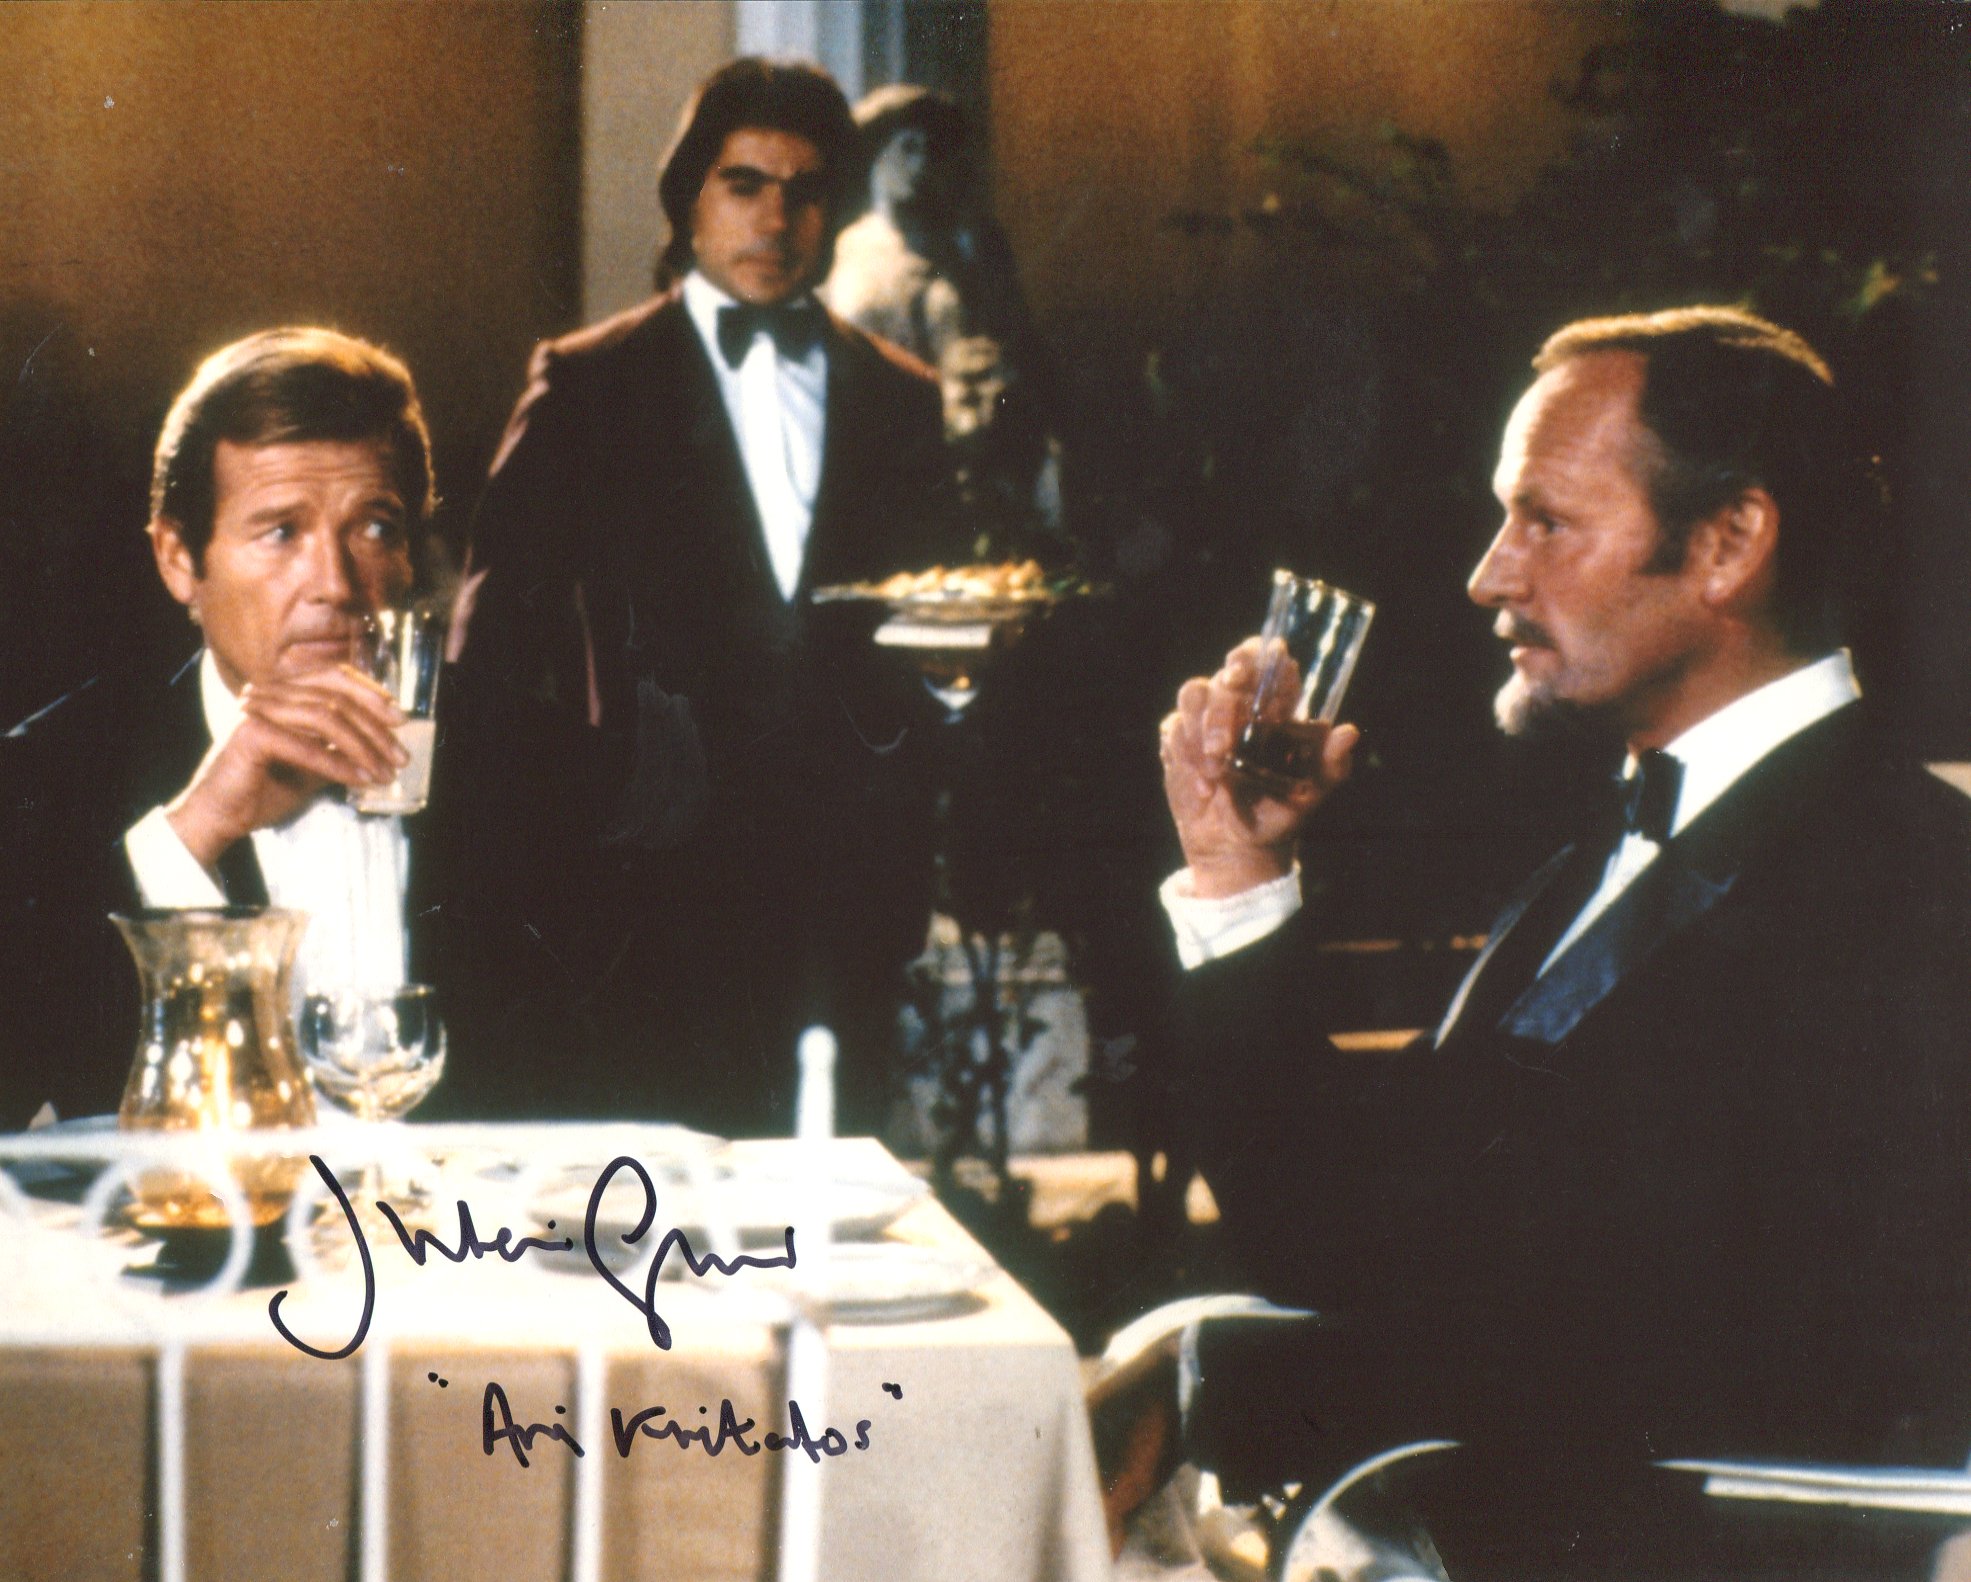 007 James Bond bad guy Julian Glover as Kristatos signed 8x10 photo, he has also added his character